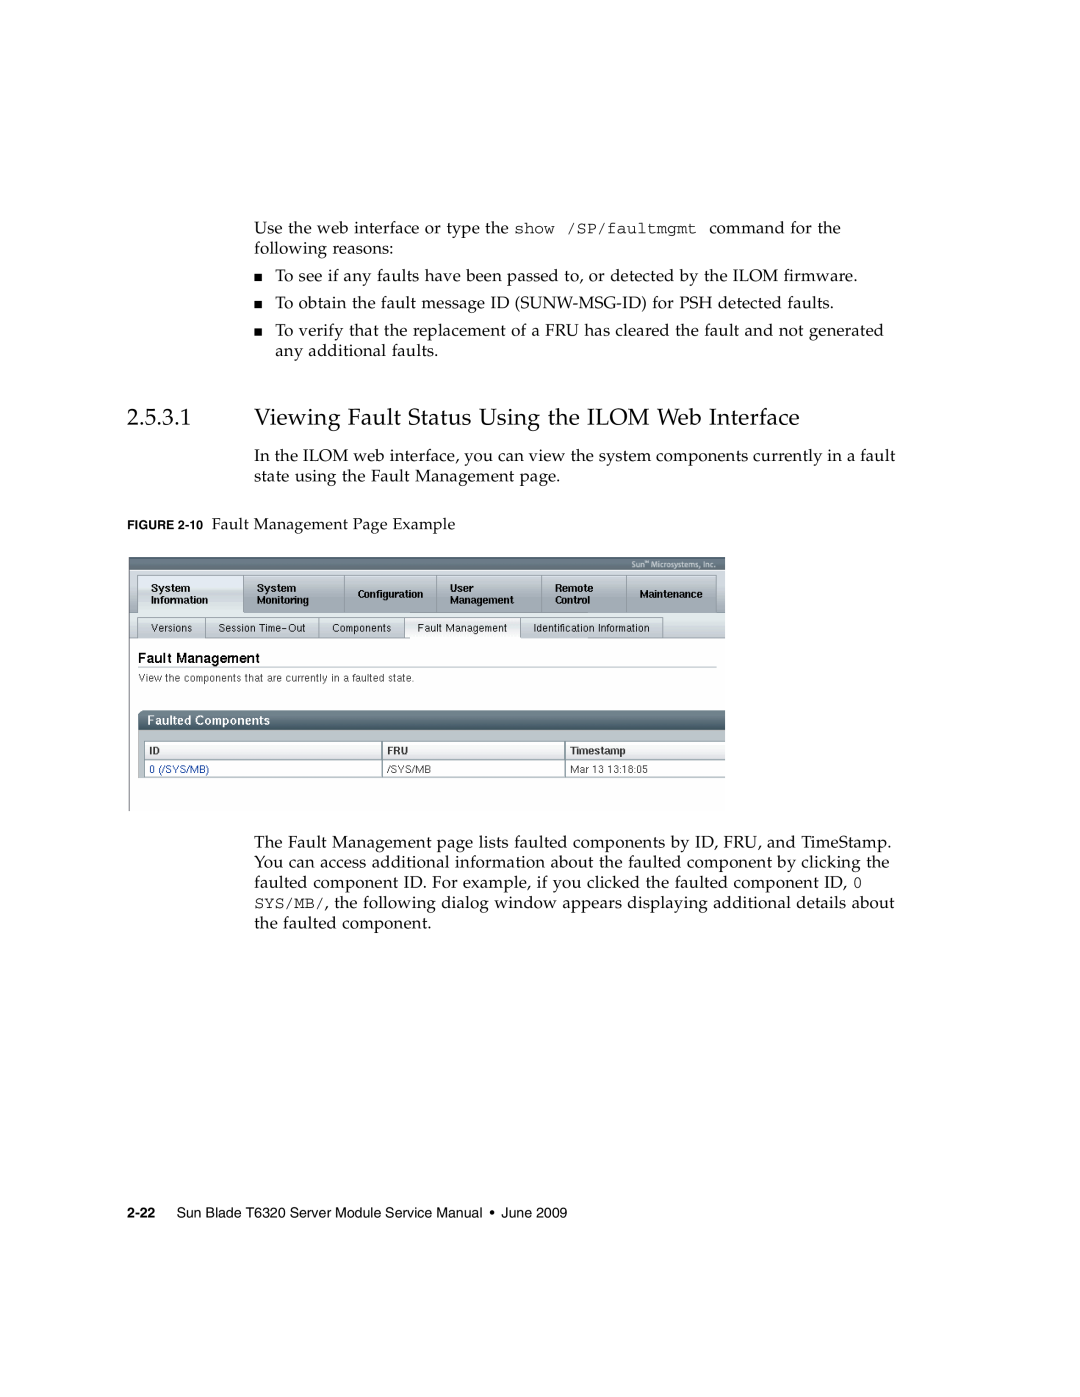 Sun Microsystems T6320 service manual Viewing Fault Status Using the ILOM Web Interface 